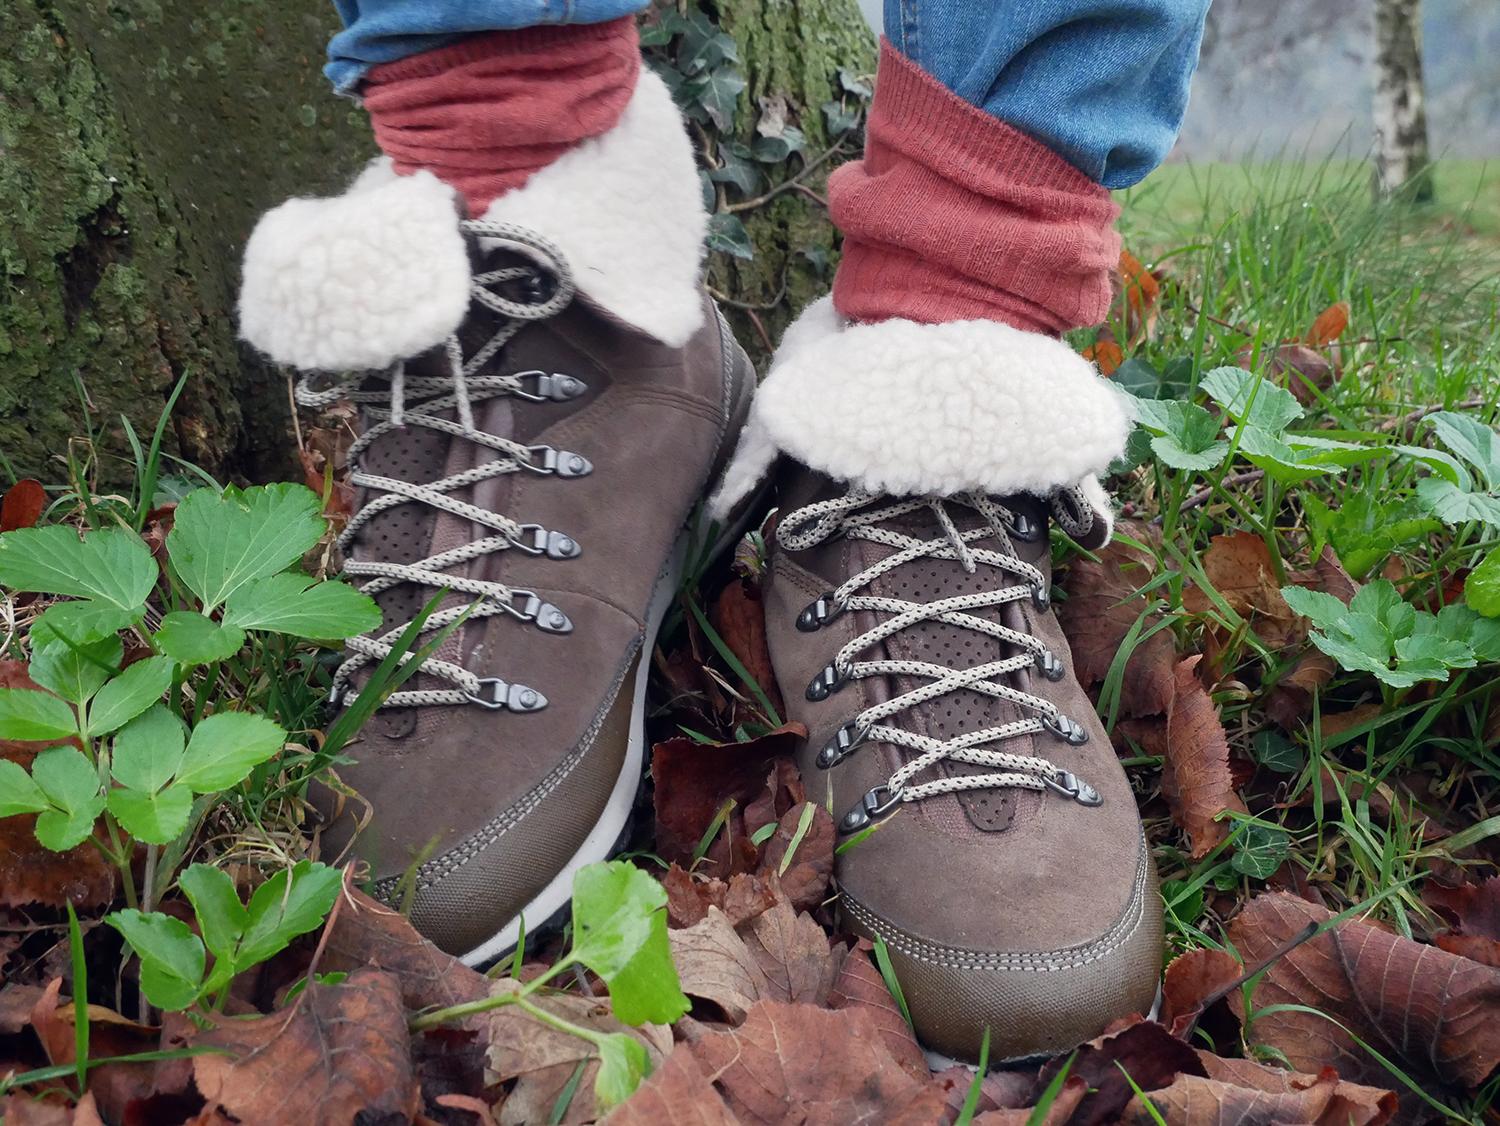 COMPETITION: Win a pair of Hi-Tec hiking boots